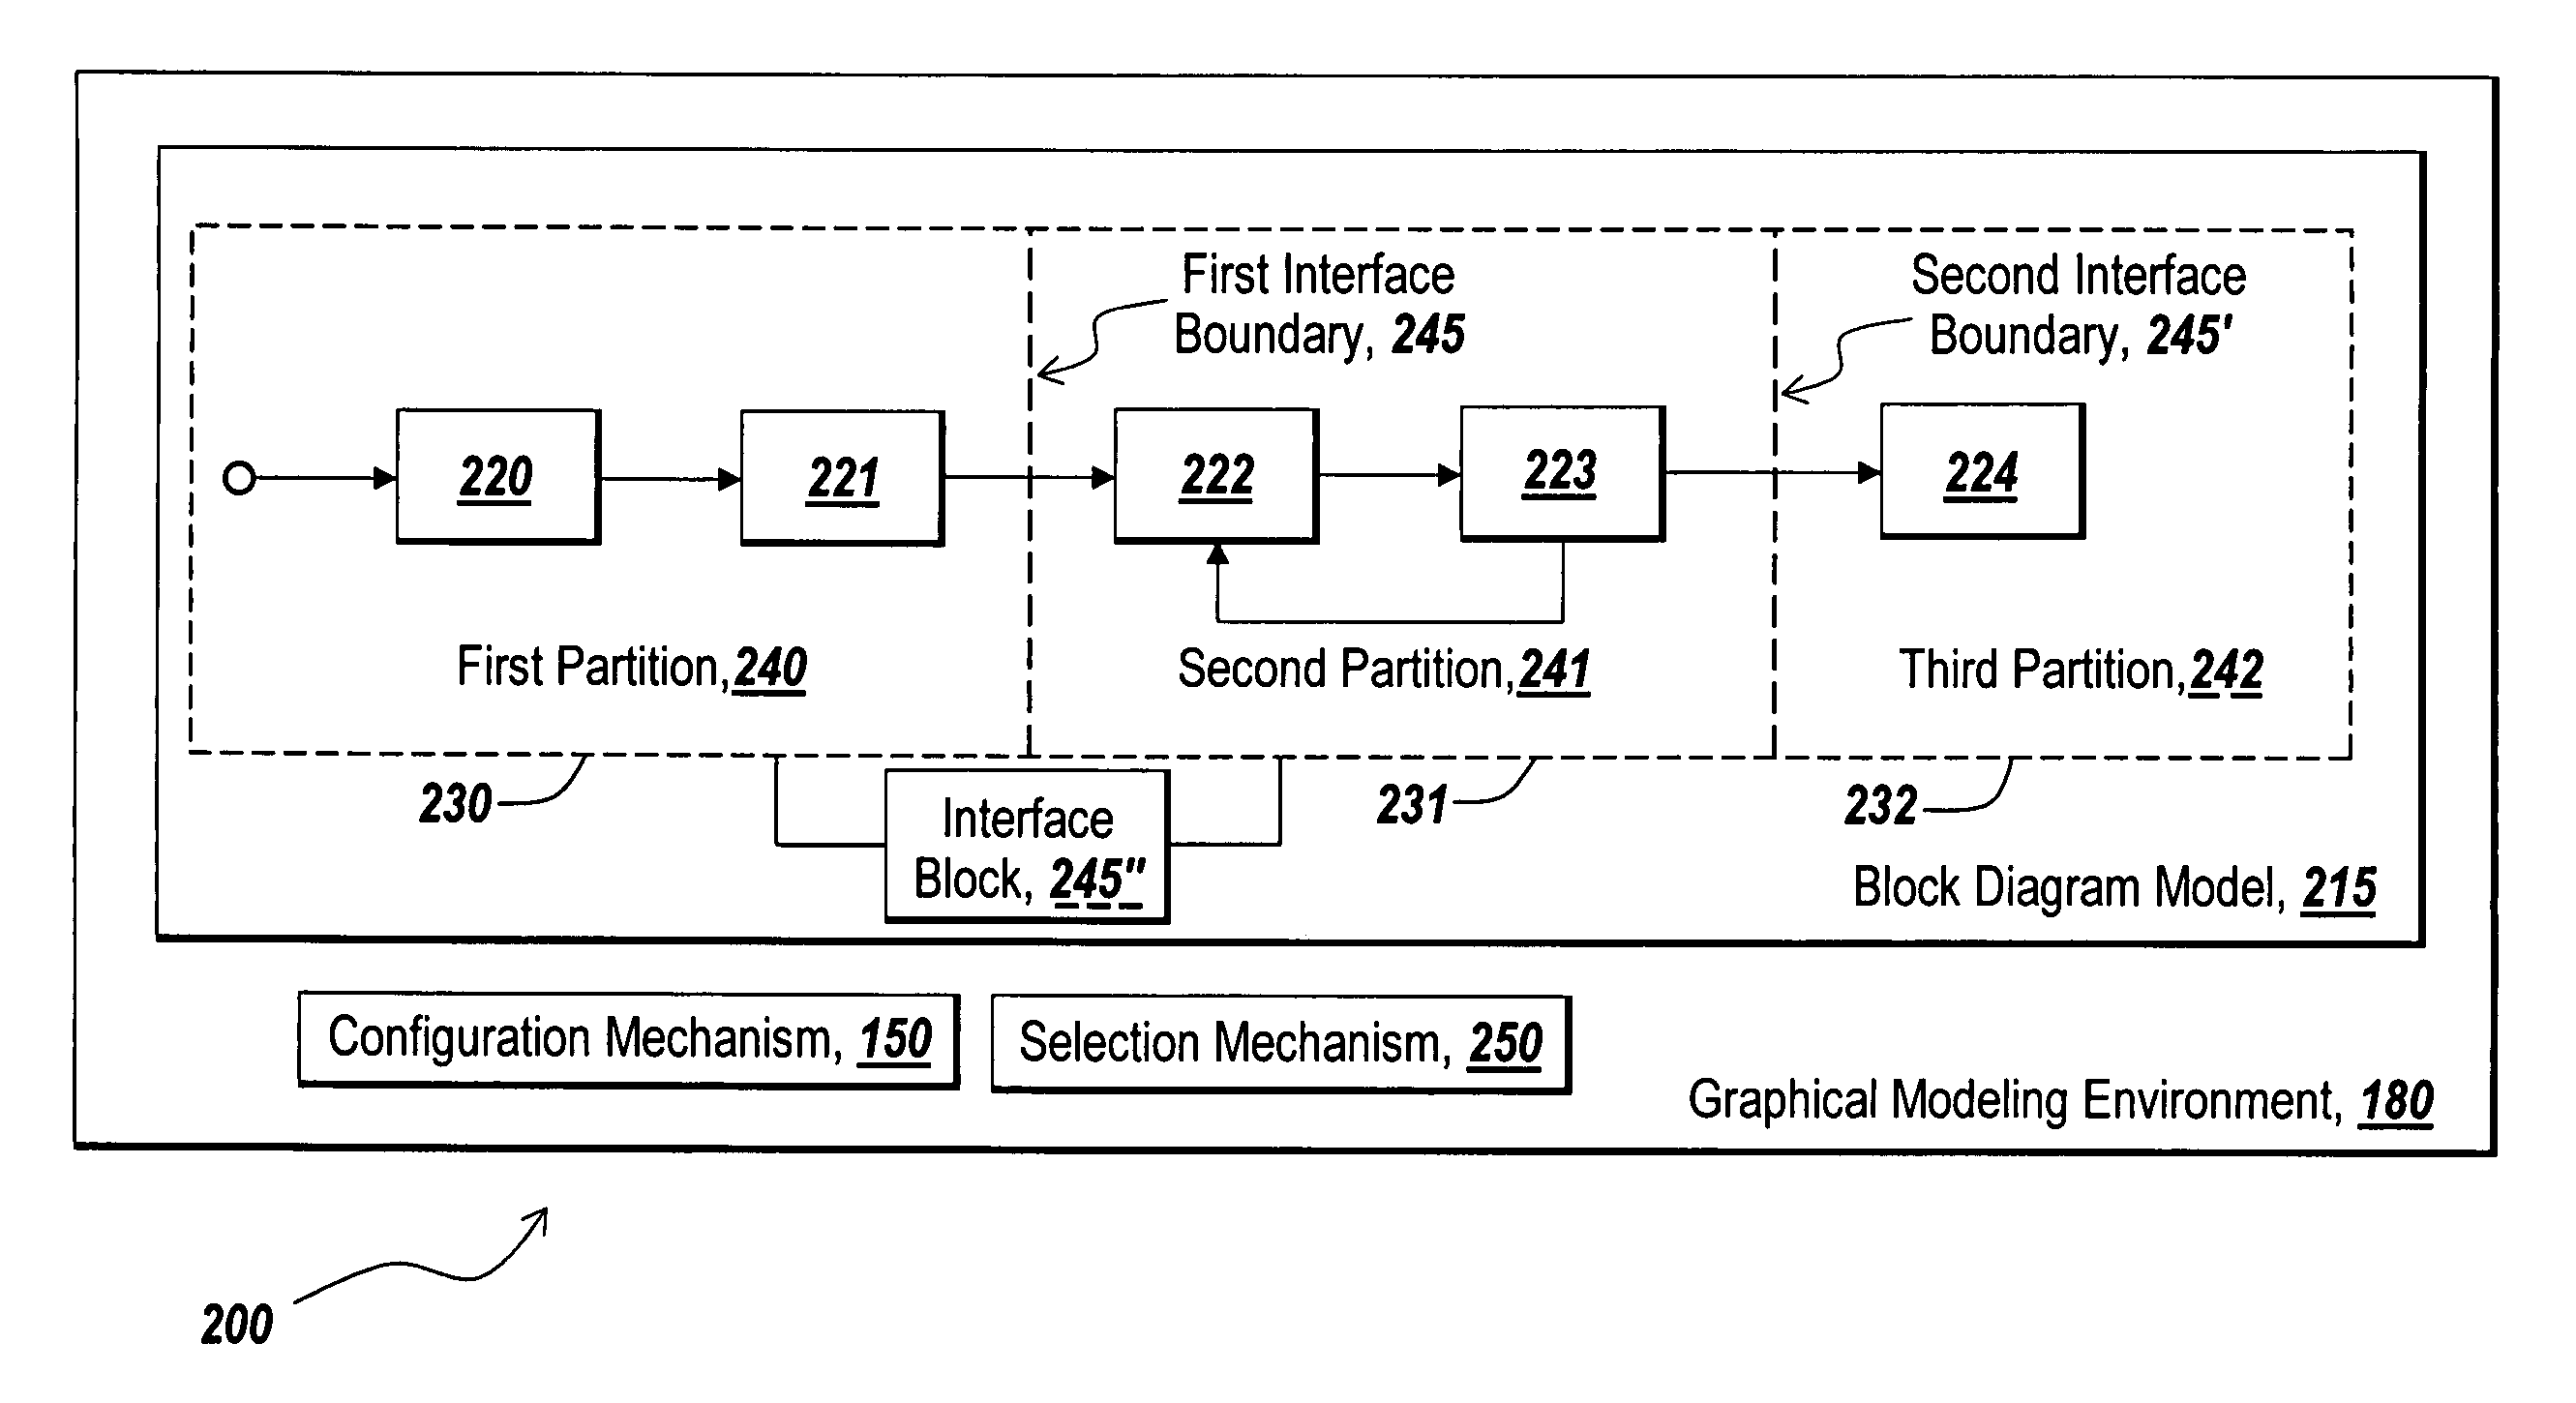 Automatic generation of component interfaces for computational hardware implementations generated from a block diagram model